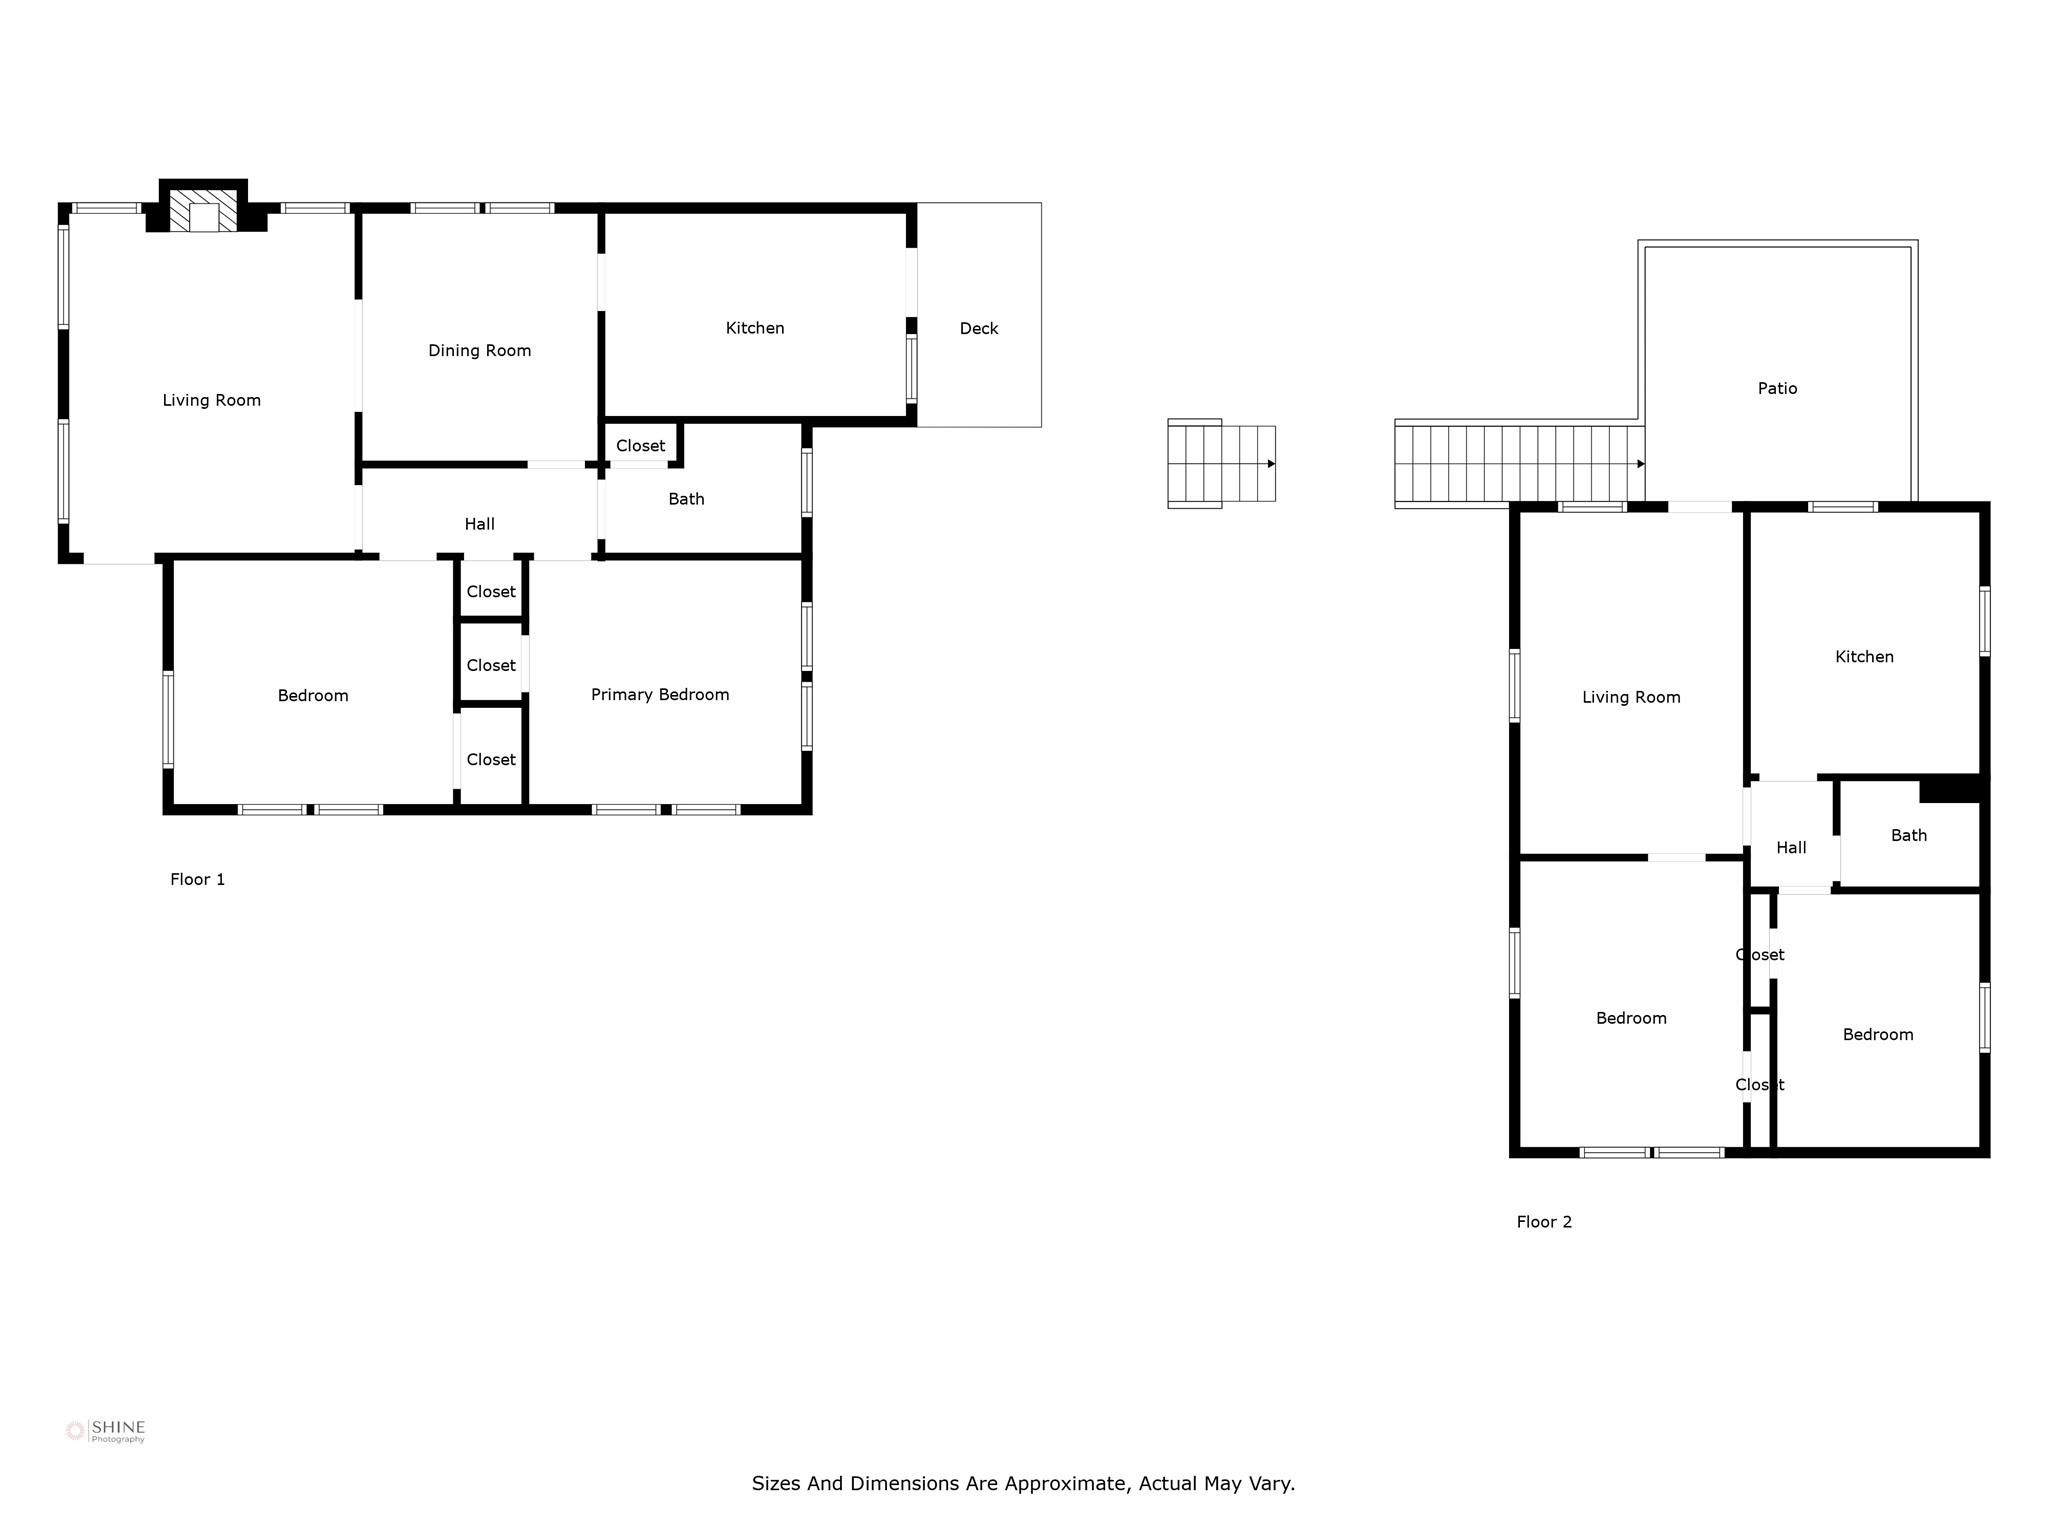 Floor plan of the entire property.